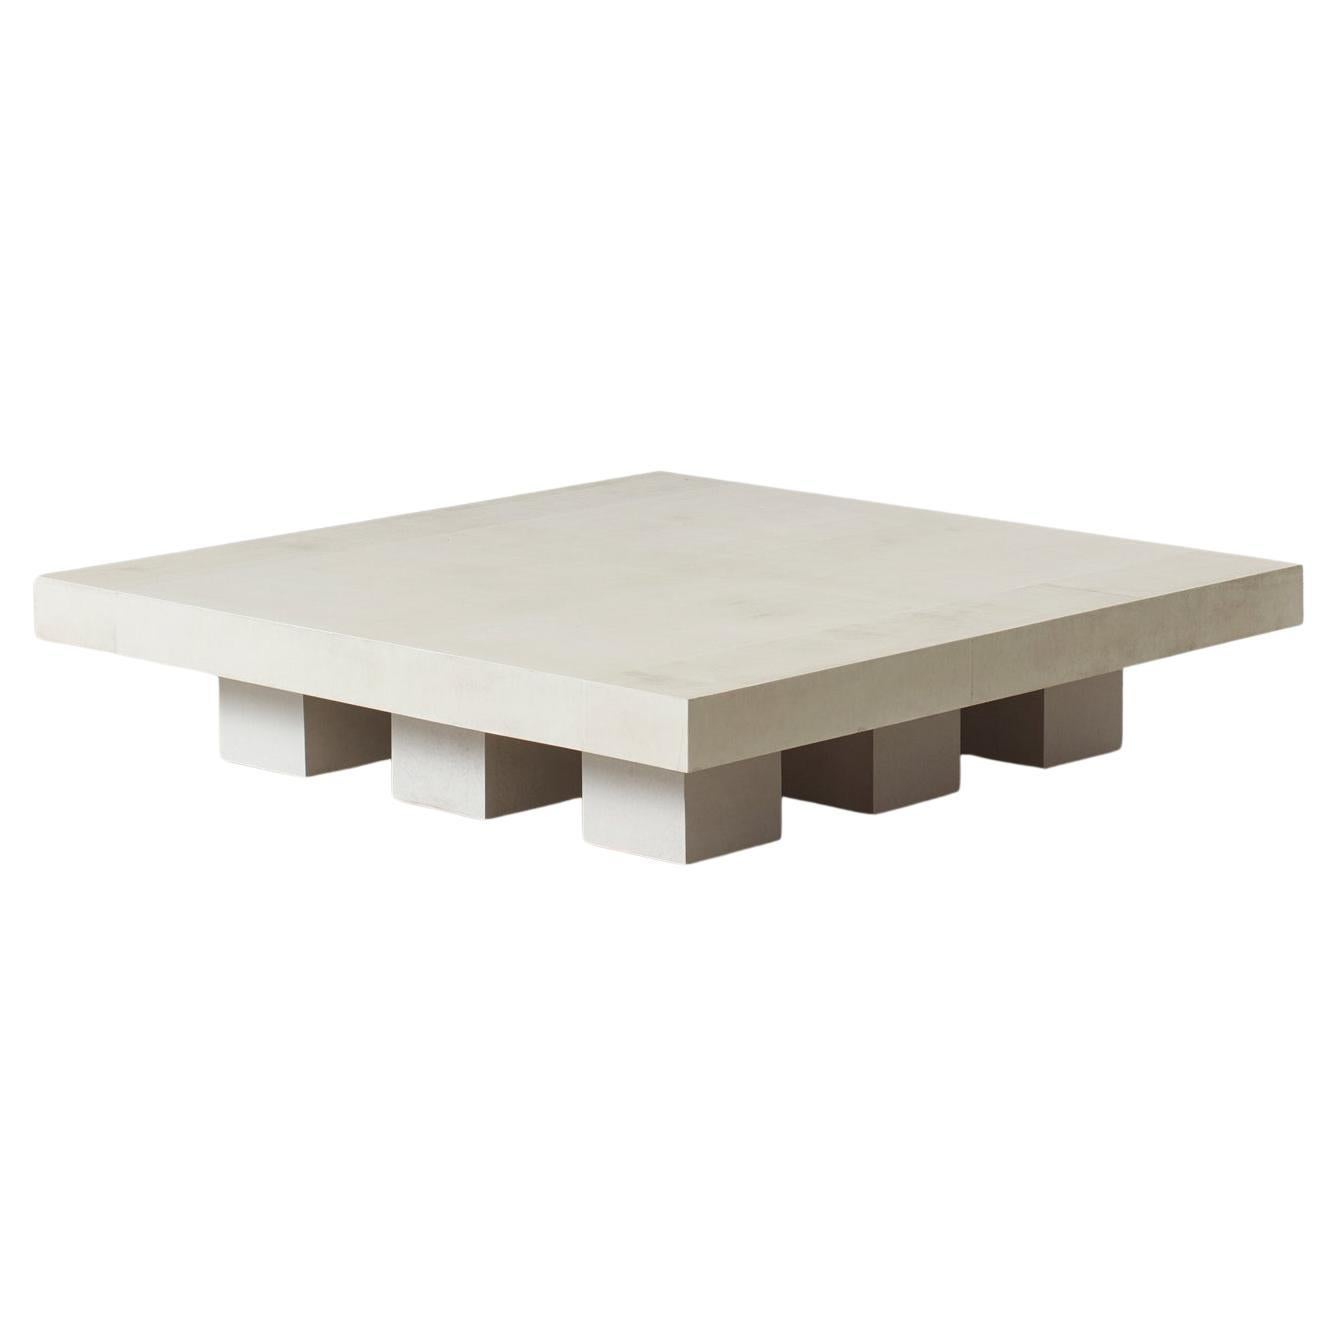 David Horan Paper coffee table for Béton Brut, UK, 2022 For Sale